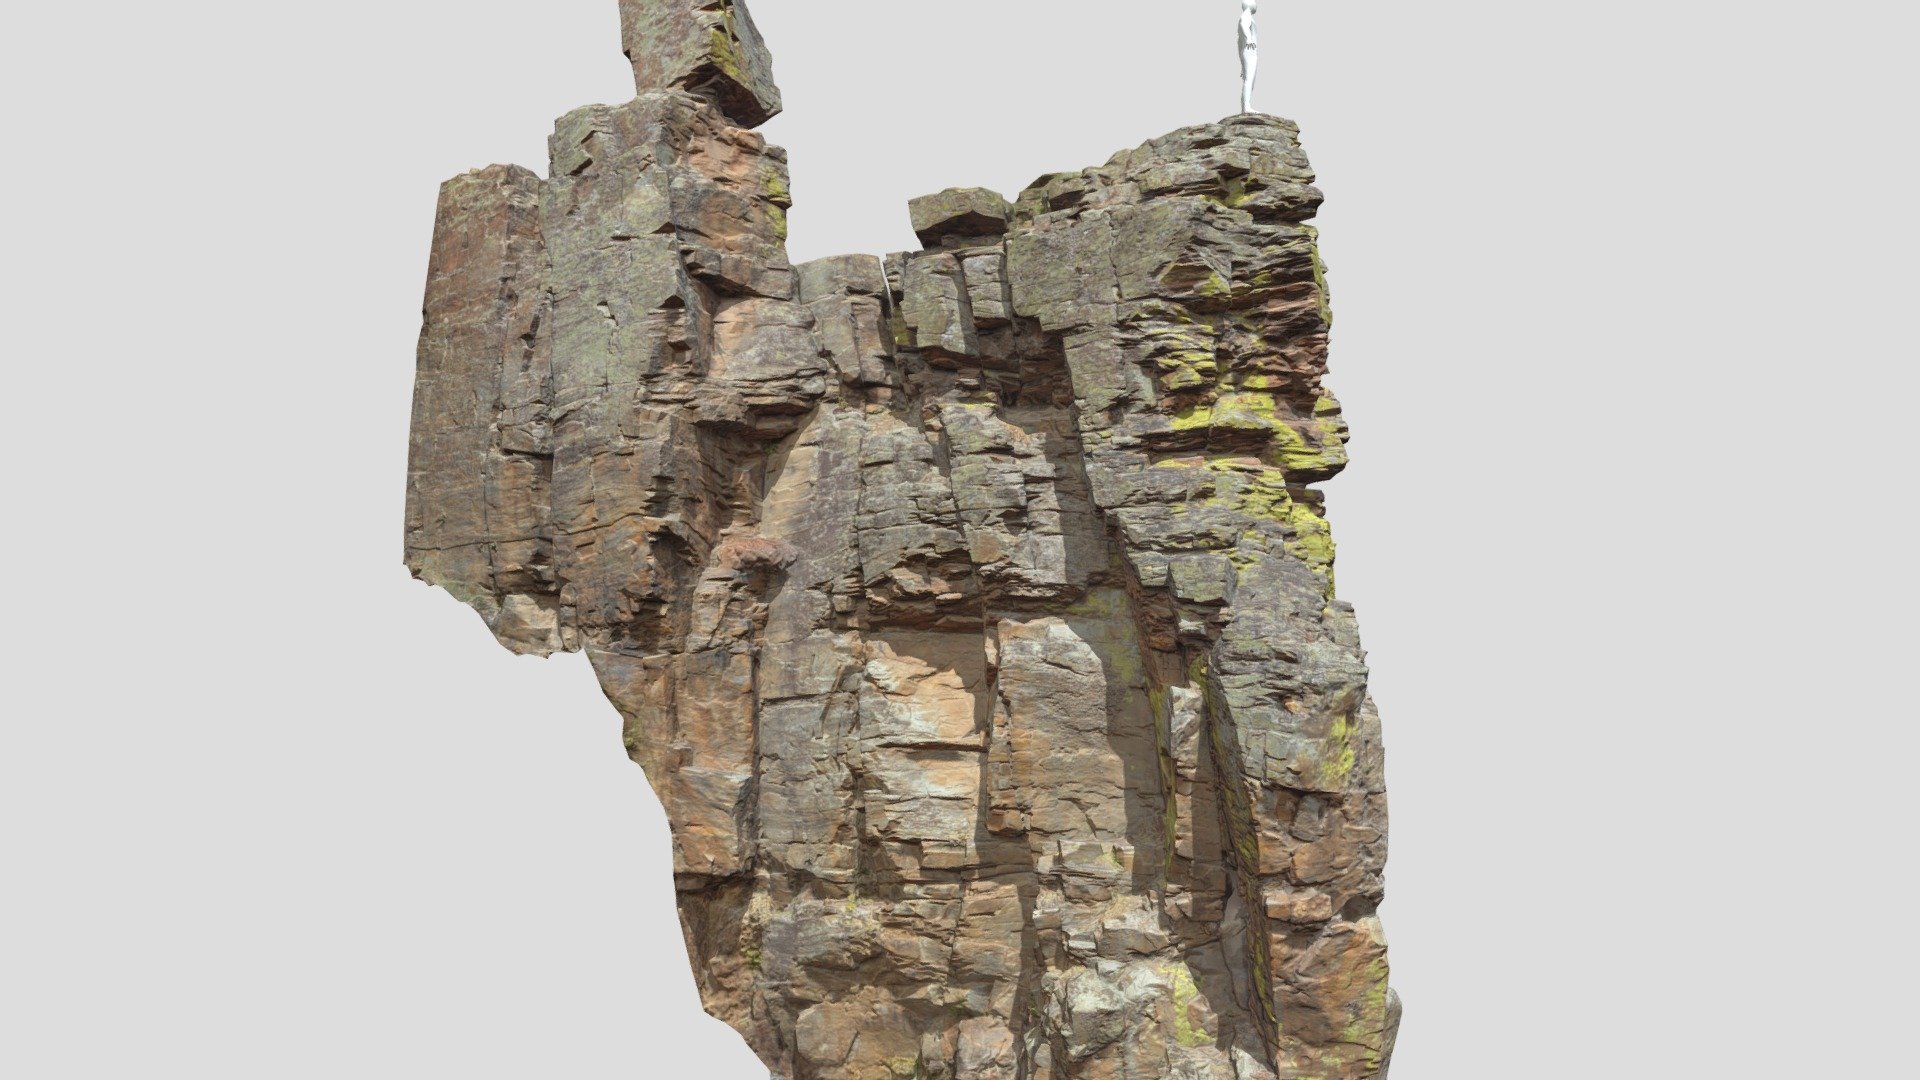 Fully processed 3D scans: no light information, color-matched, etc. 

Ready to use for all kind of CGI

Source Contains:





.blend




.obj




.fbx



8K Textures for each model:





normal




albedo




roughness



Please let me know if something isn’t working as it should.

Realistic Big Cliff Rock Pillar Scan Large - Big Cliff Rock Pillar Scan - Buy Royalty Free 3D model by Per's Scan Collection (@perz_scans) 3d model